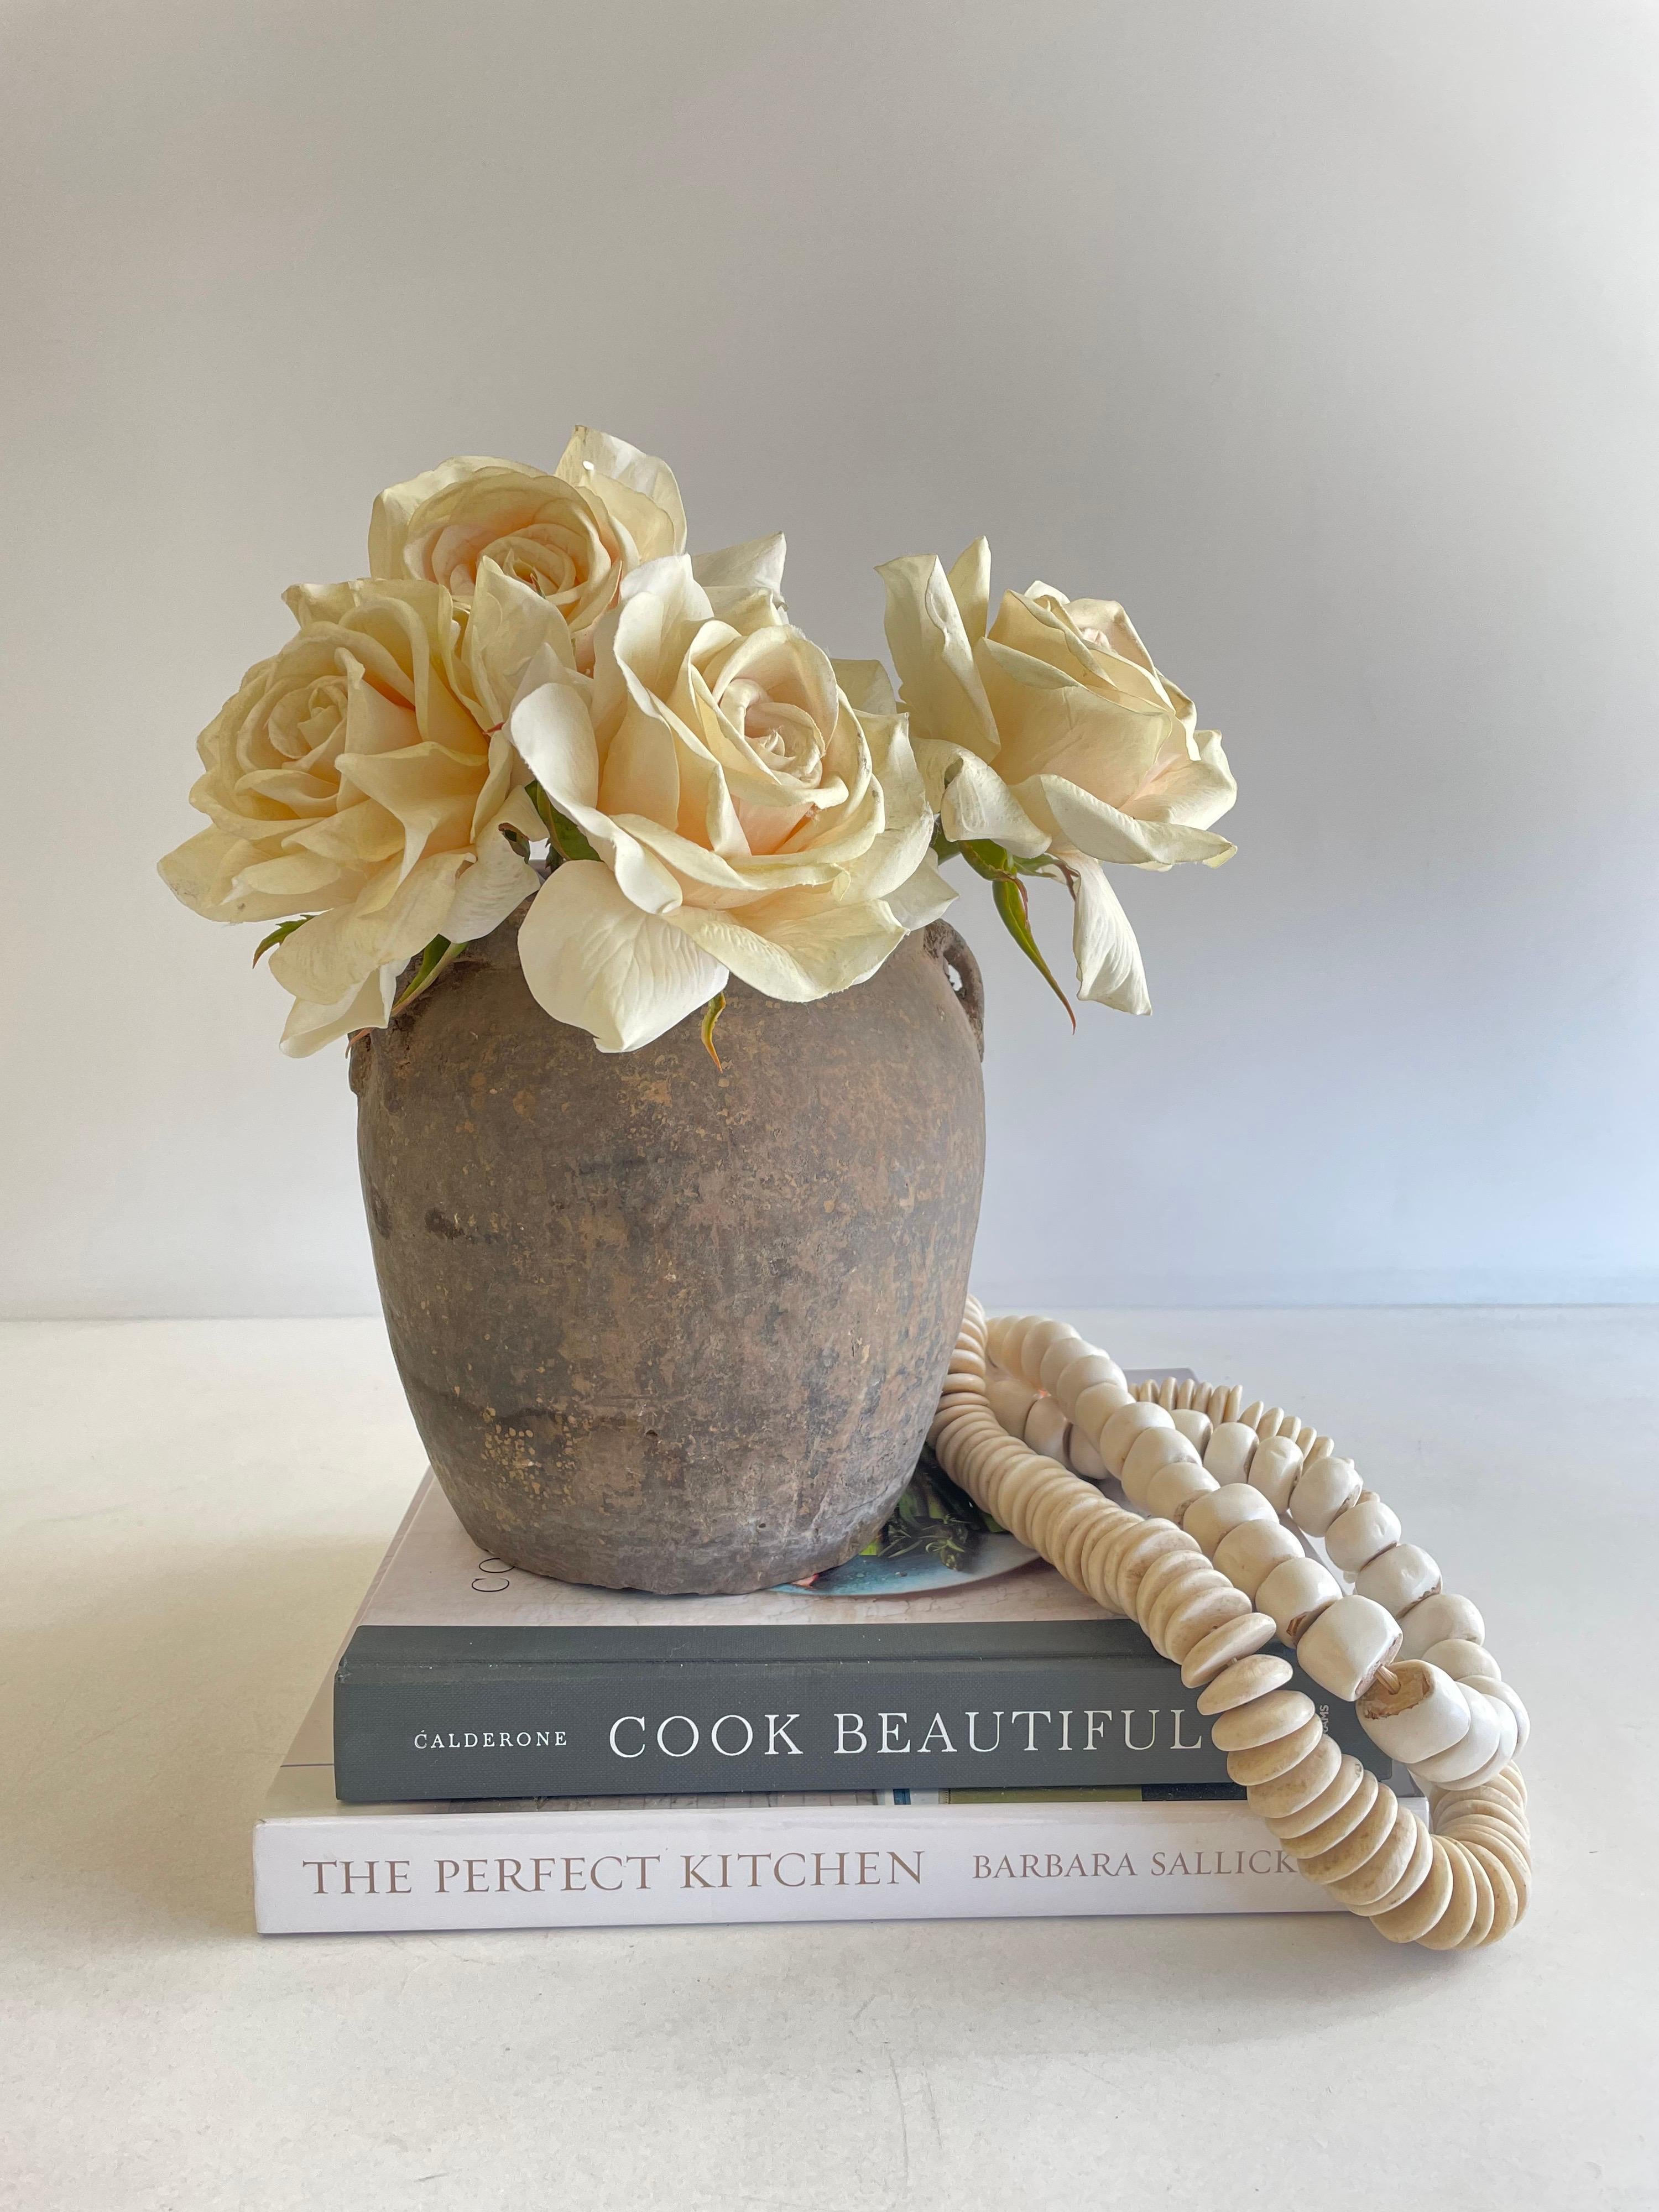 Vintage Poterie à l'huile matte petit 
Vintage Matte Clay oil pottery decorative pot Vintage Matte oil pots pottery beautifully rich in character, this vintage oil pot adds just the right amount of texture + warmth where you need it. Superbe